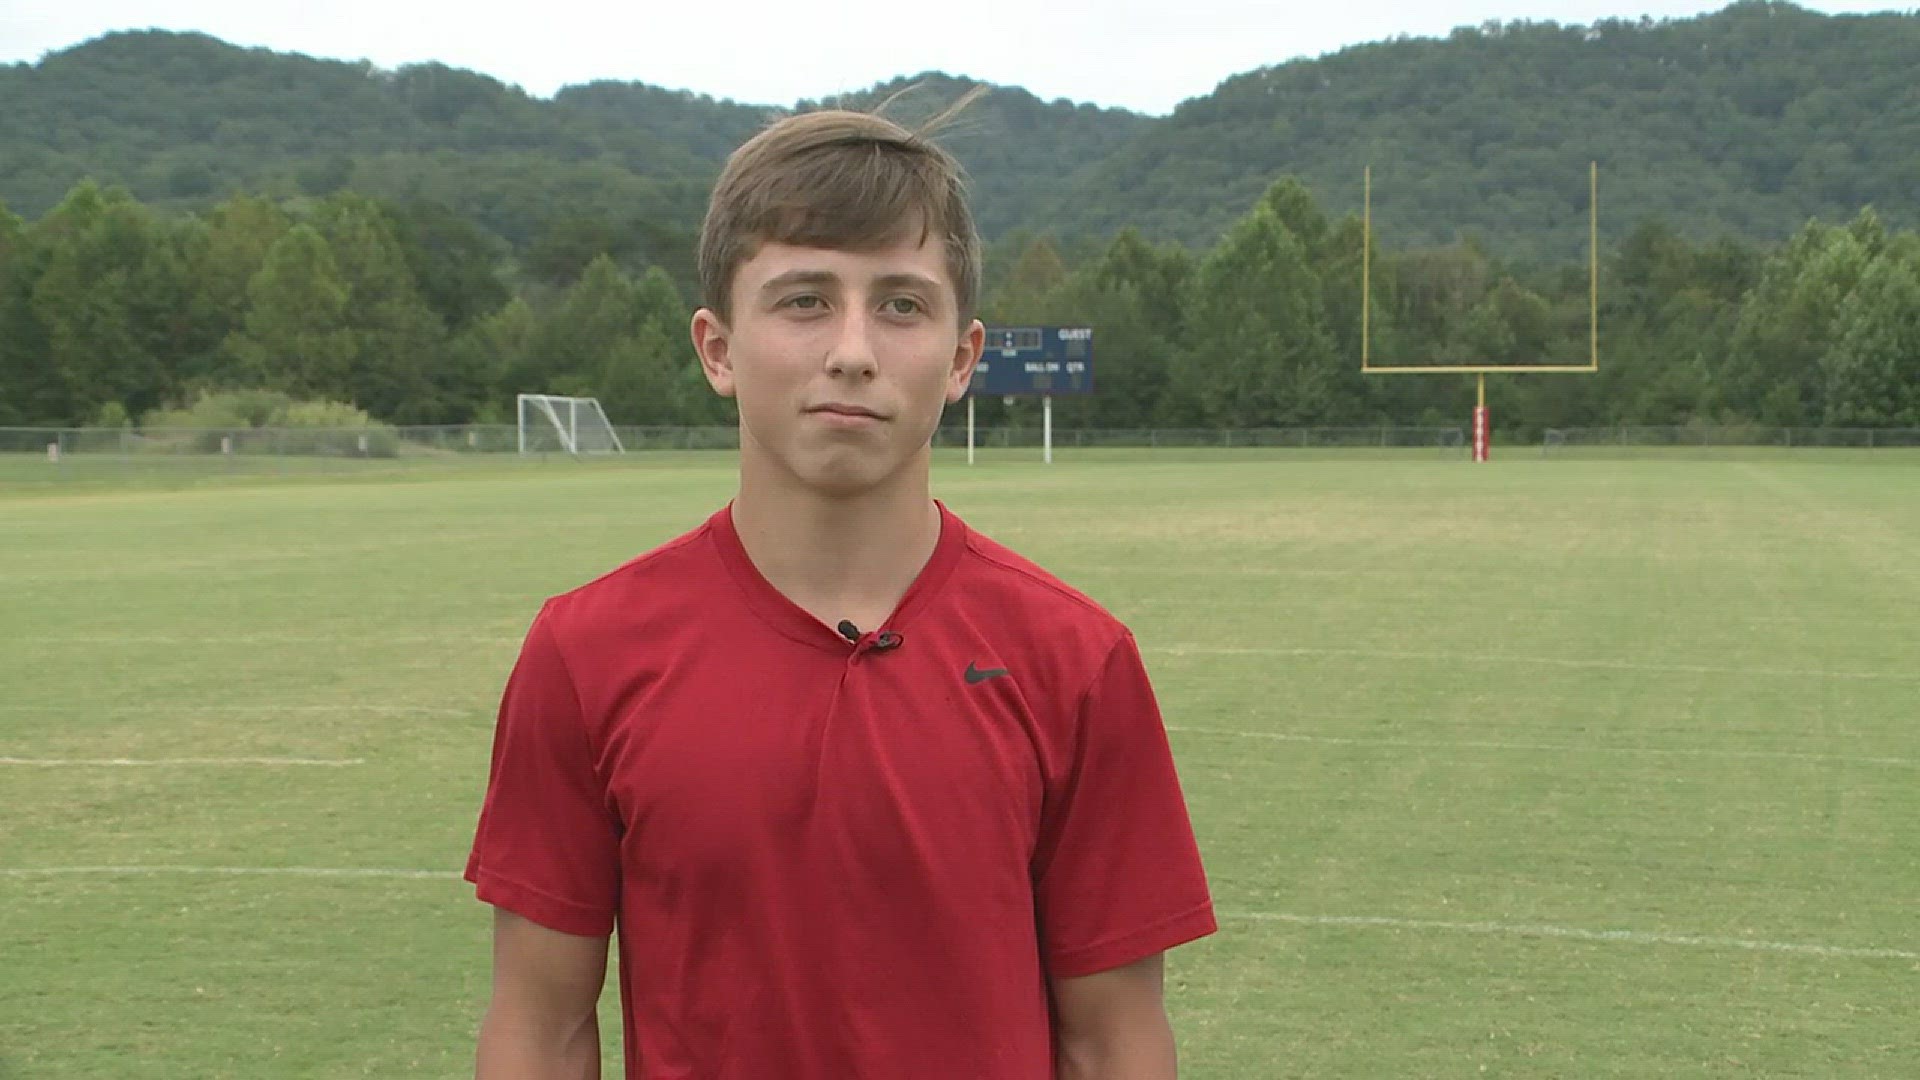 Union County running back Dalton Truan talks about snapping the team's 28-game losing streak.